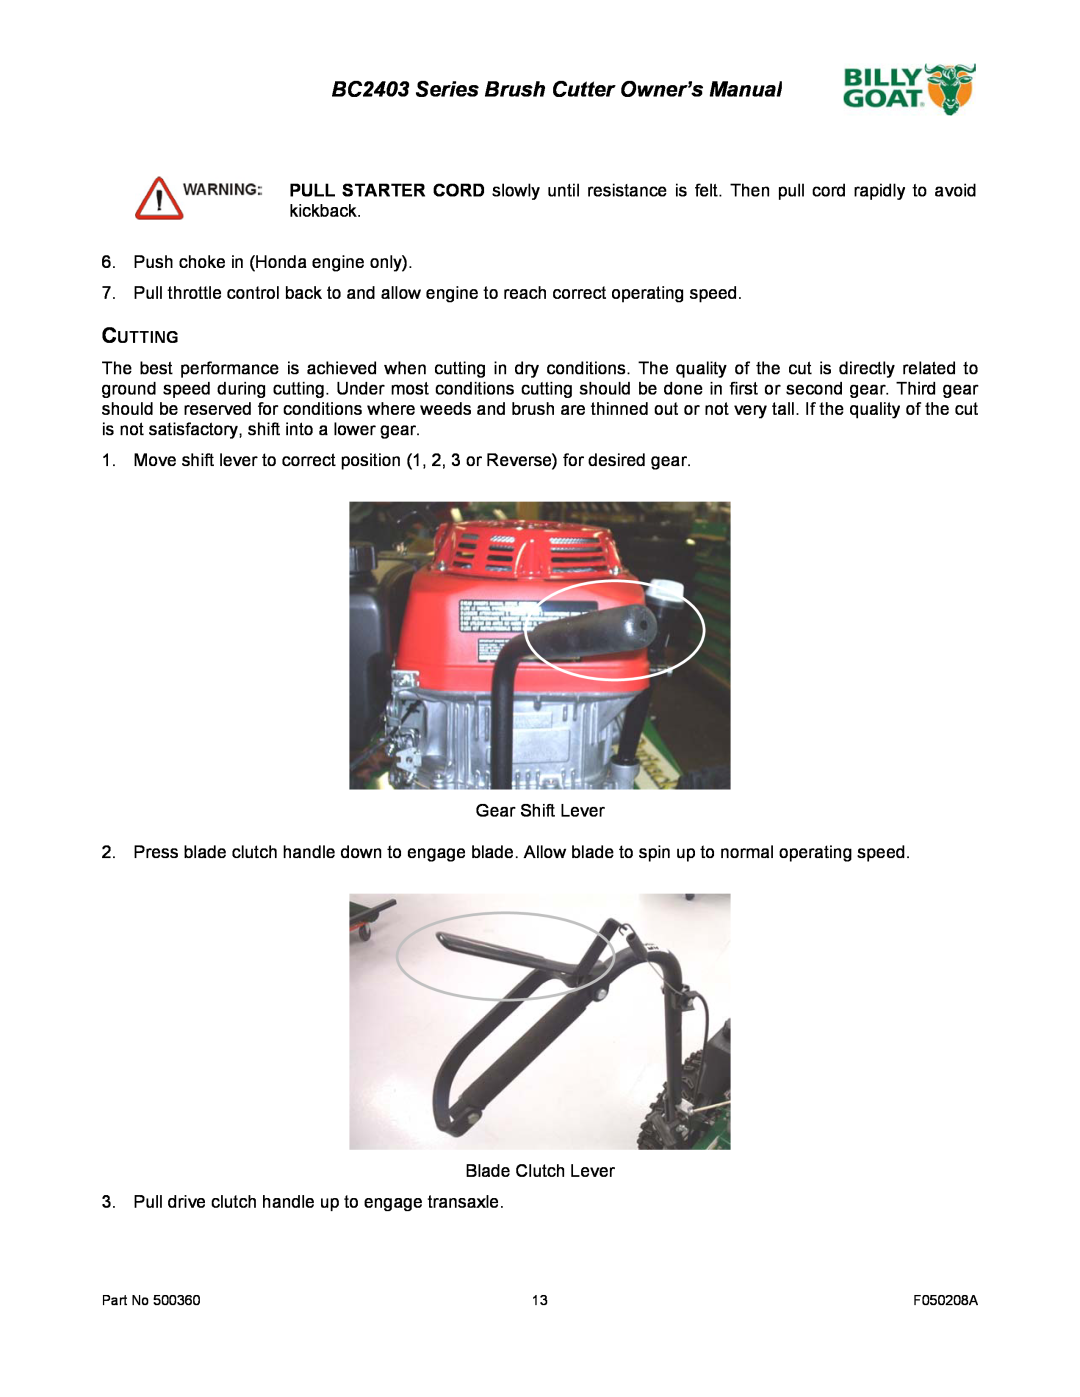 Billy Goat BC2403 Series owner manual Cutting 